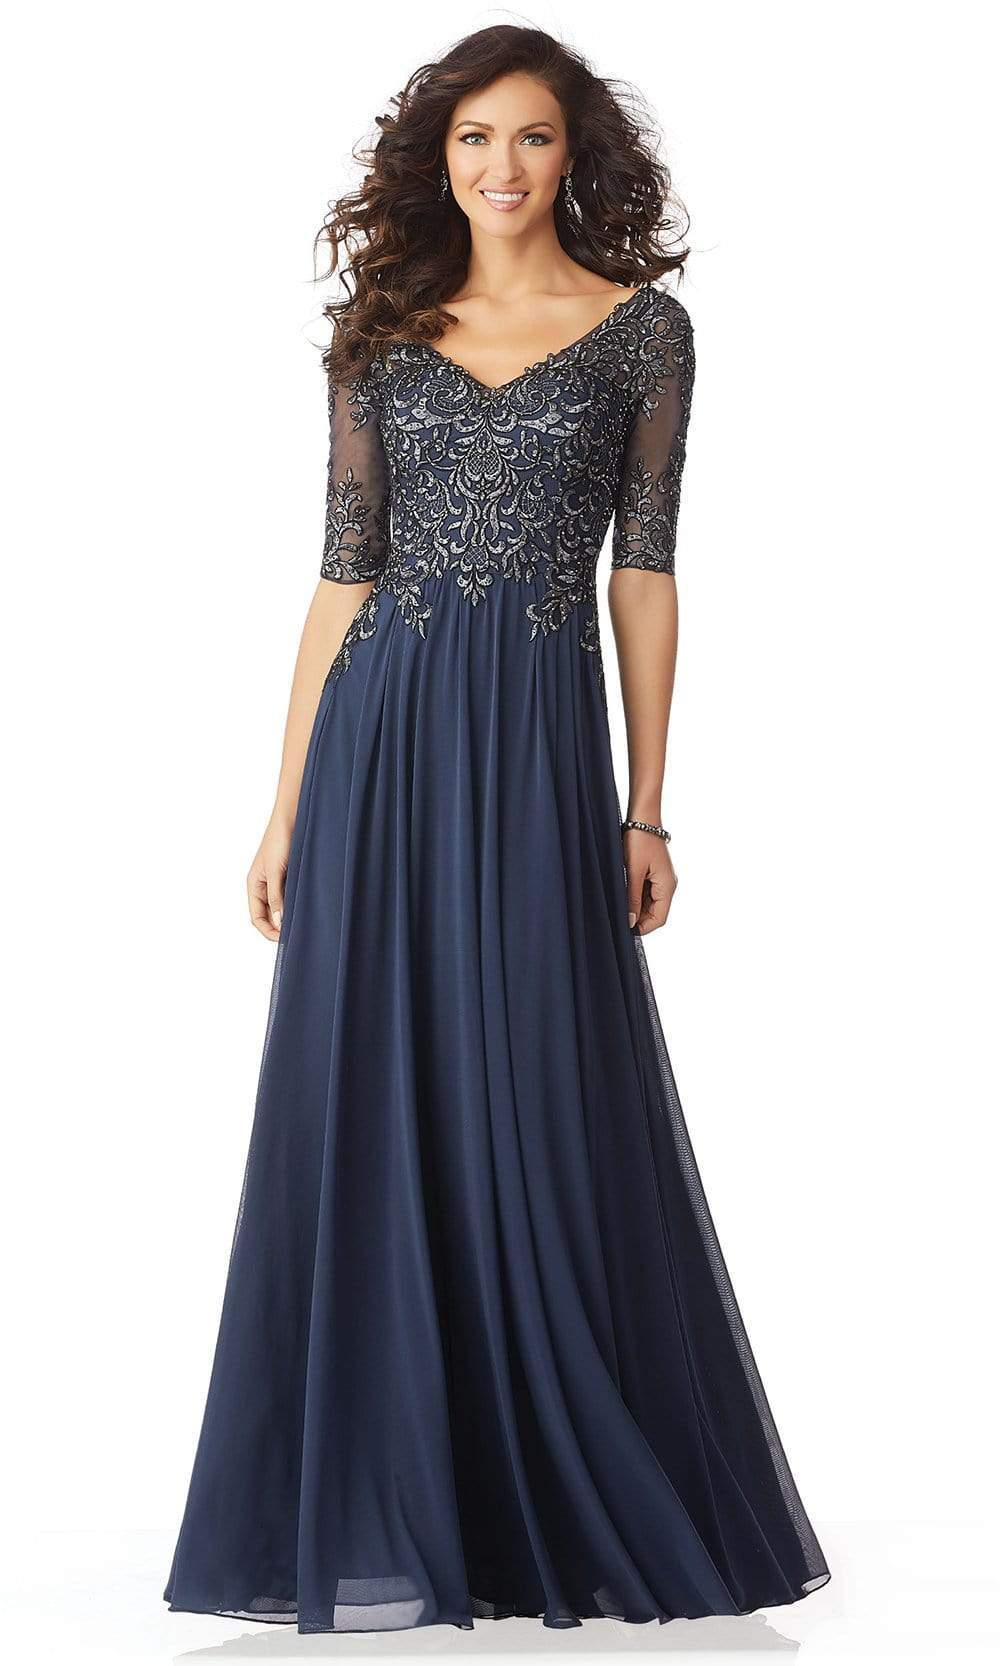 Image of MGNY By Mori Lee - 71805 Embroidered V-neck A-line Gown